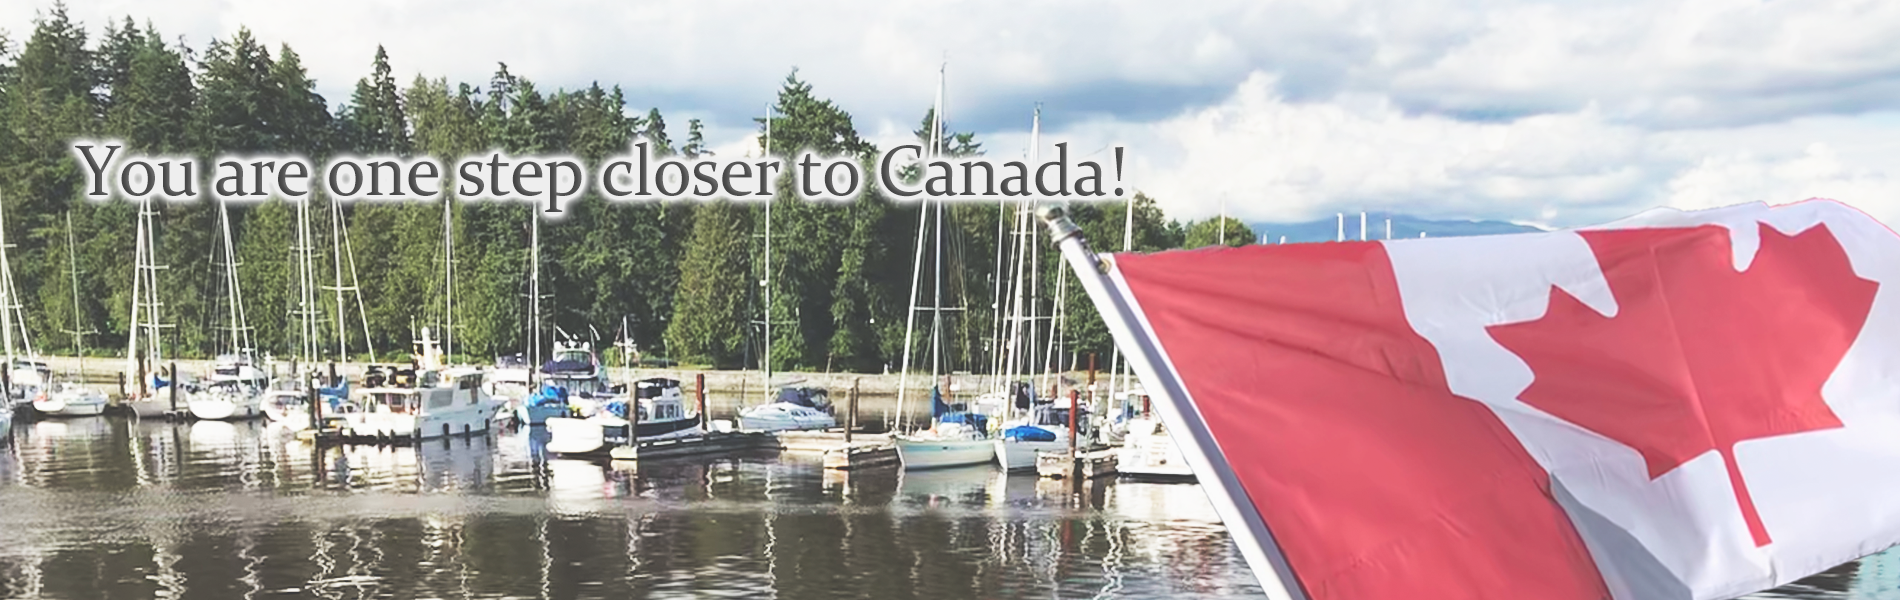 You are one step closer to Canada!